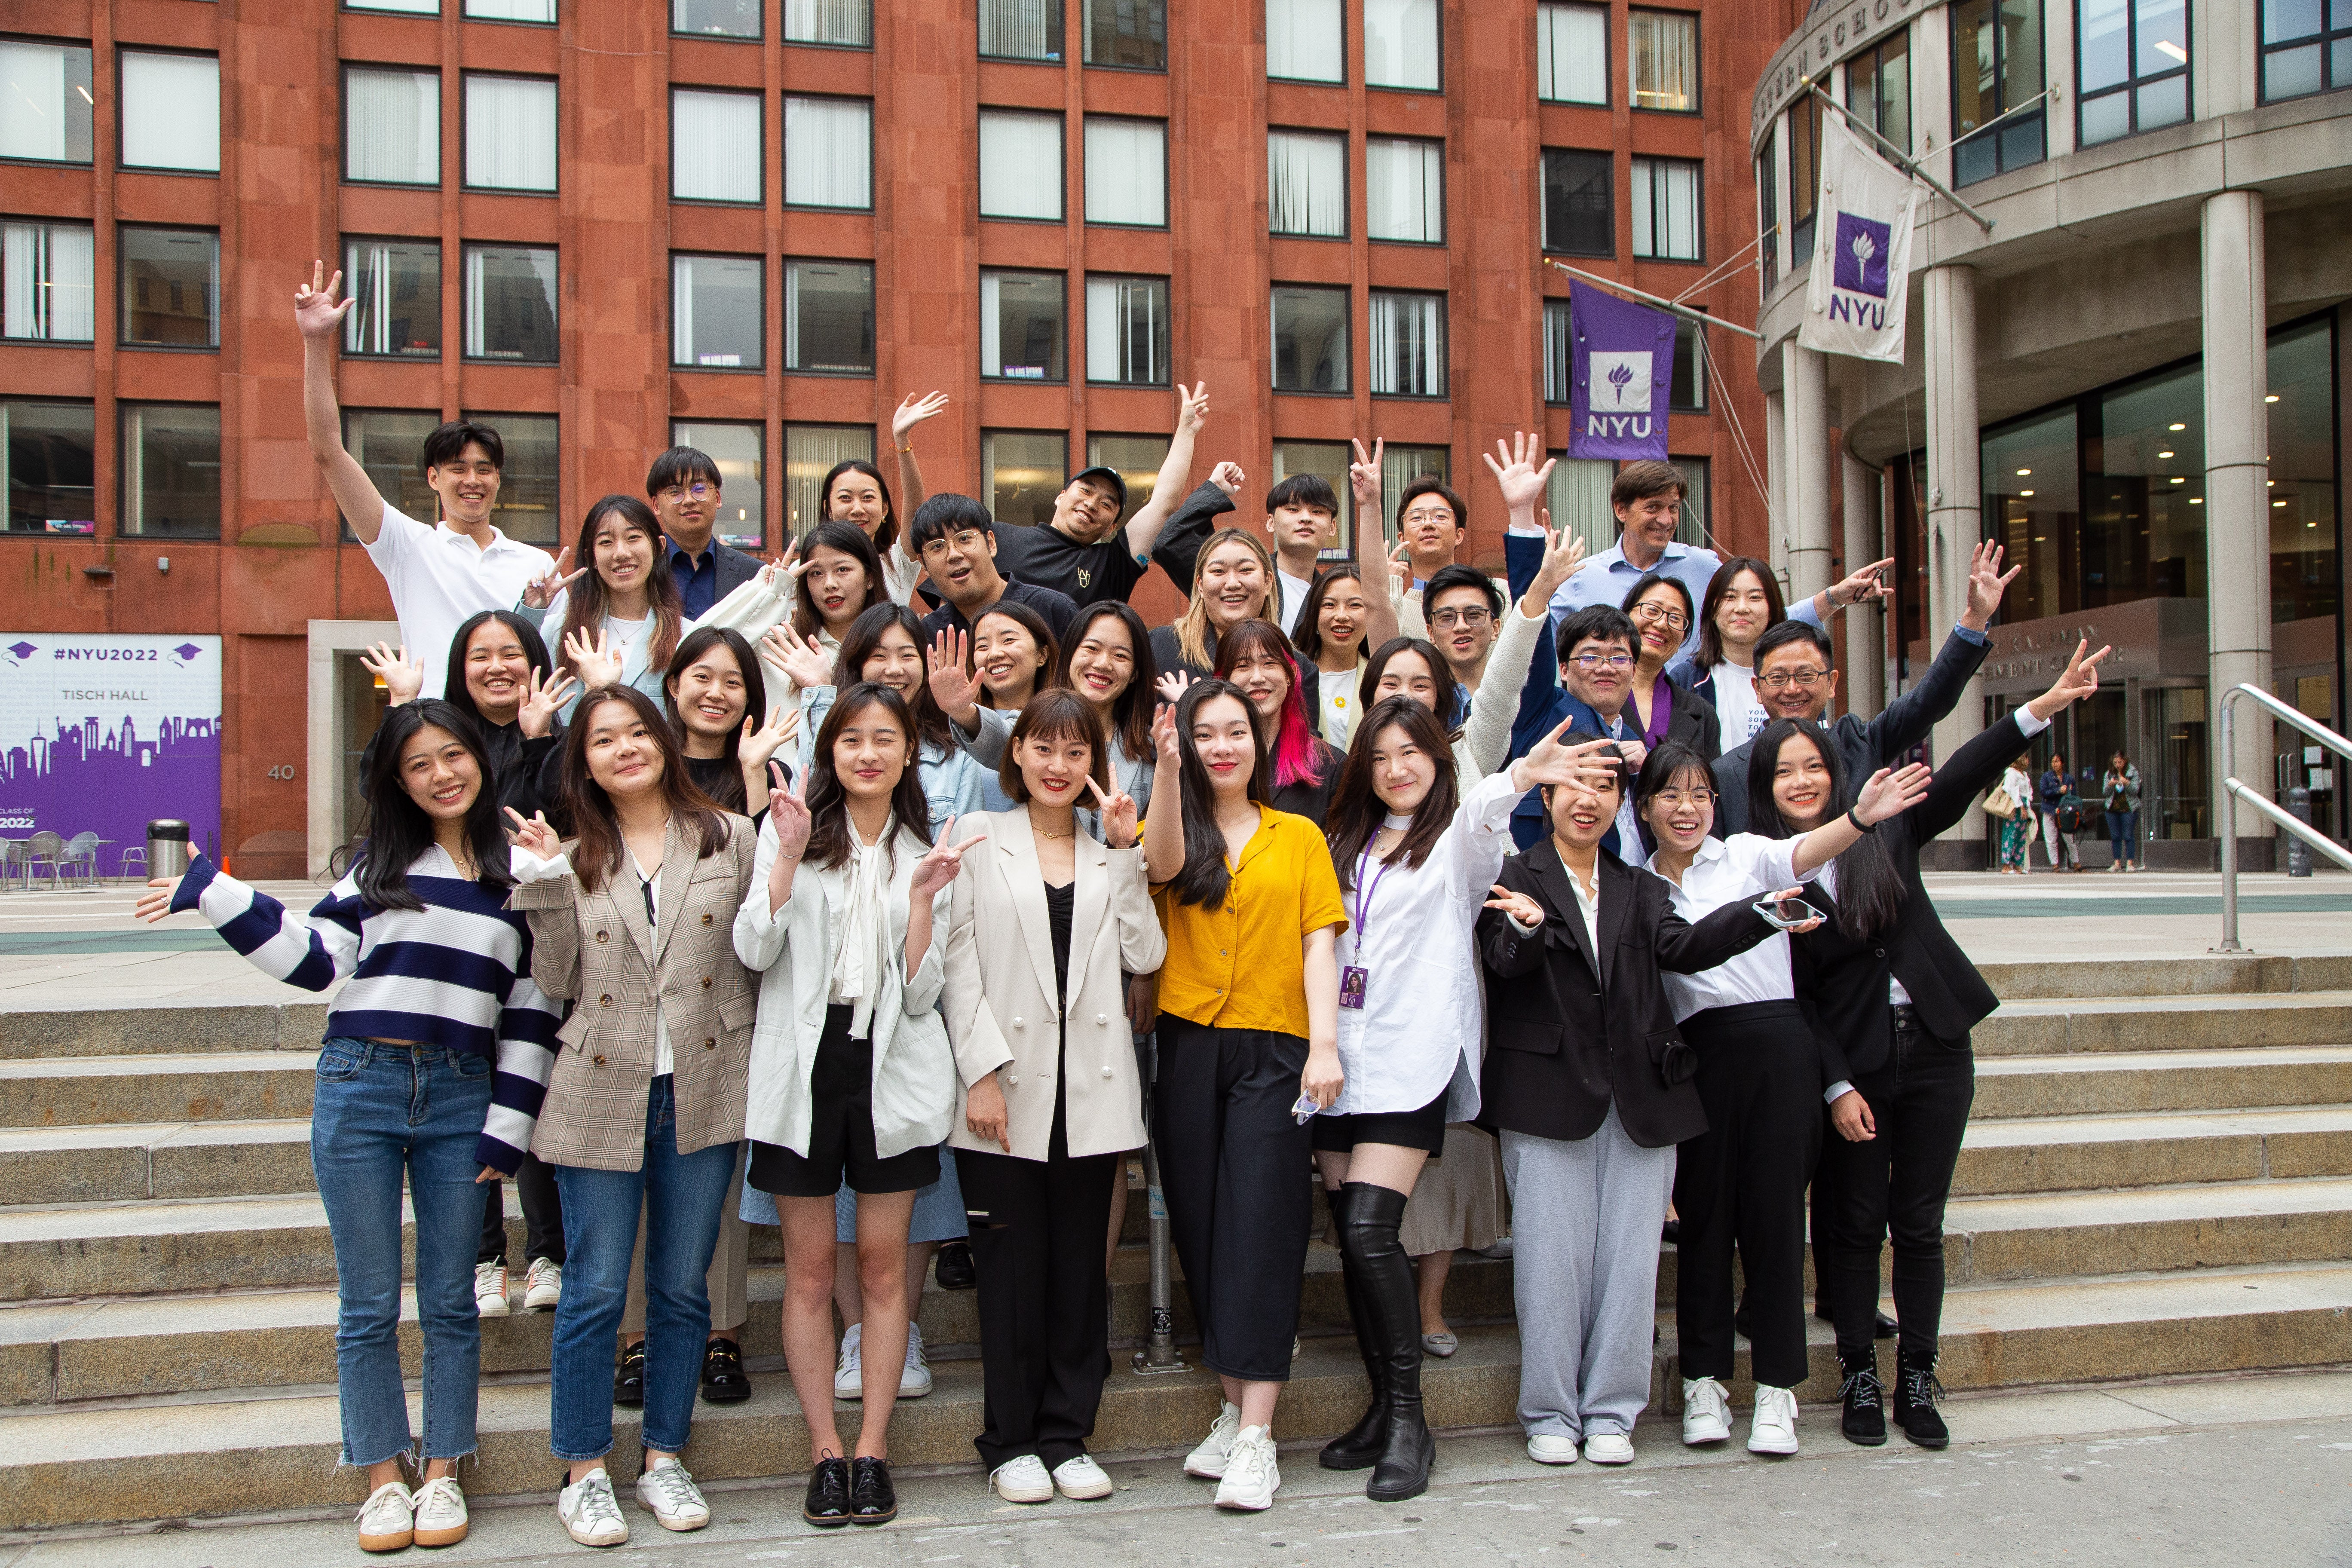 Students pose for a group photo after completing orientation